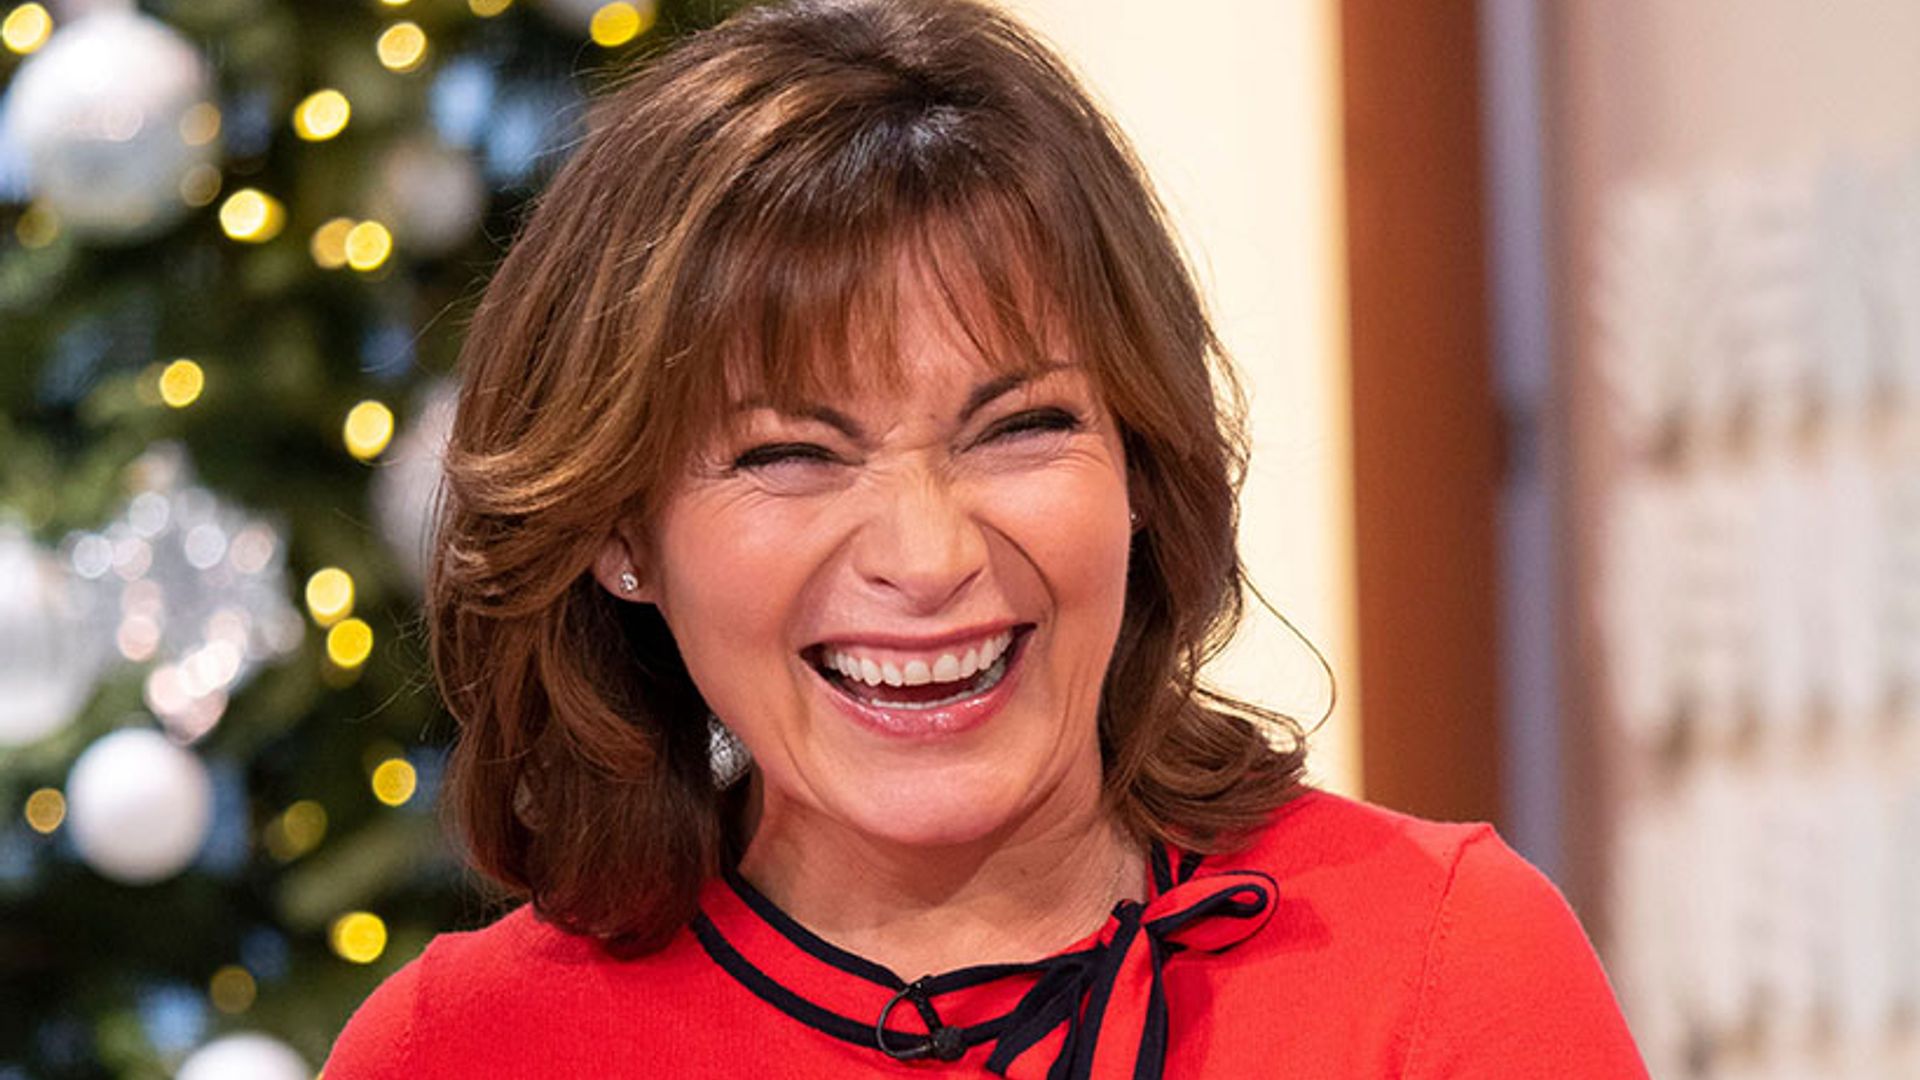 The £25 Marks & Spencer fishtail skirt that Lorraine Kelly can't get enough of